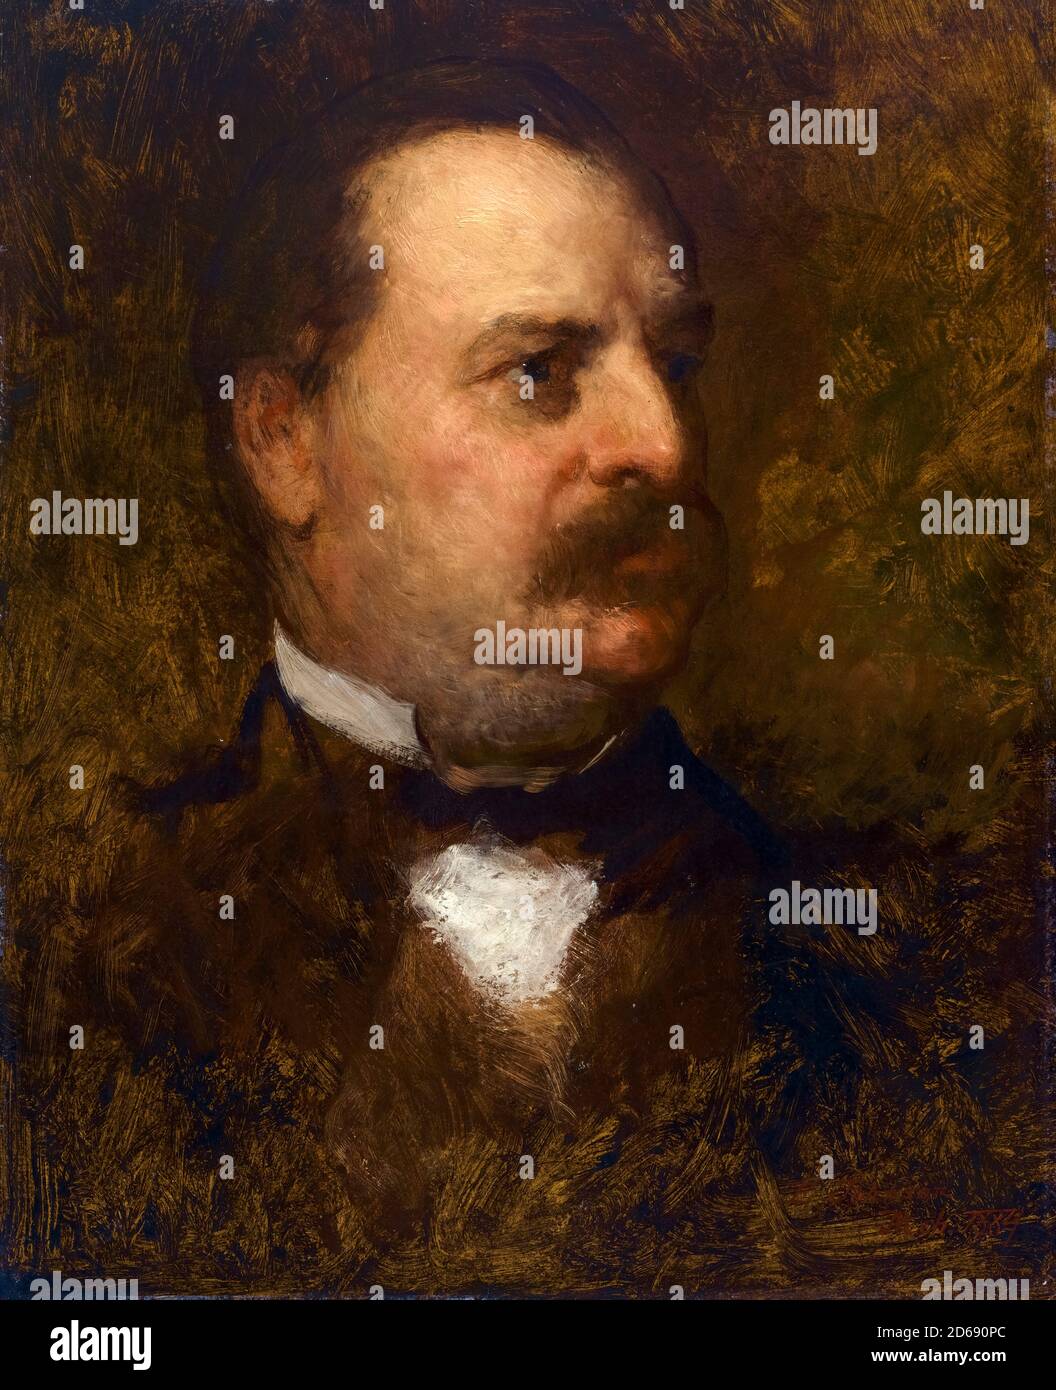 Grover Cleveland (1837-1908), American politician who was the 22nd and 24th President of the United States, portrait painting by Eastman Johnson, 1884 Stock Photo